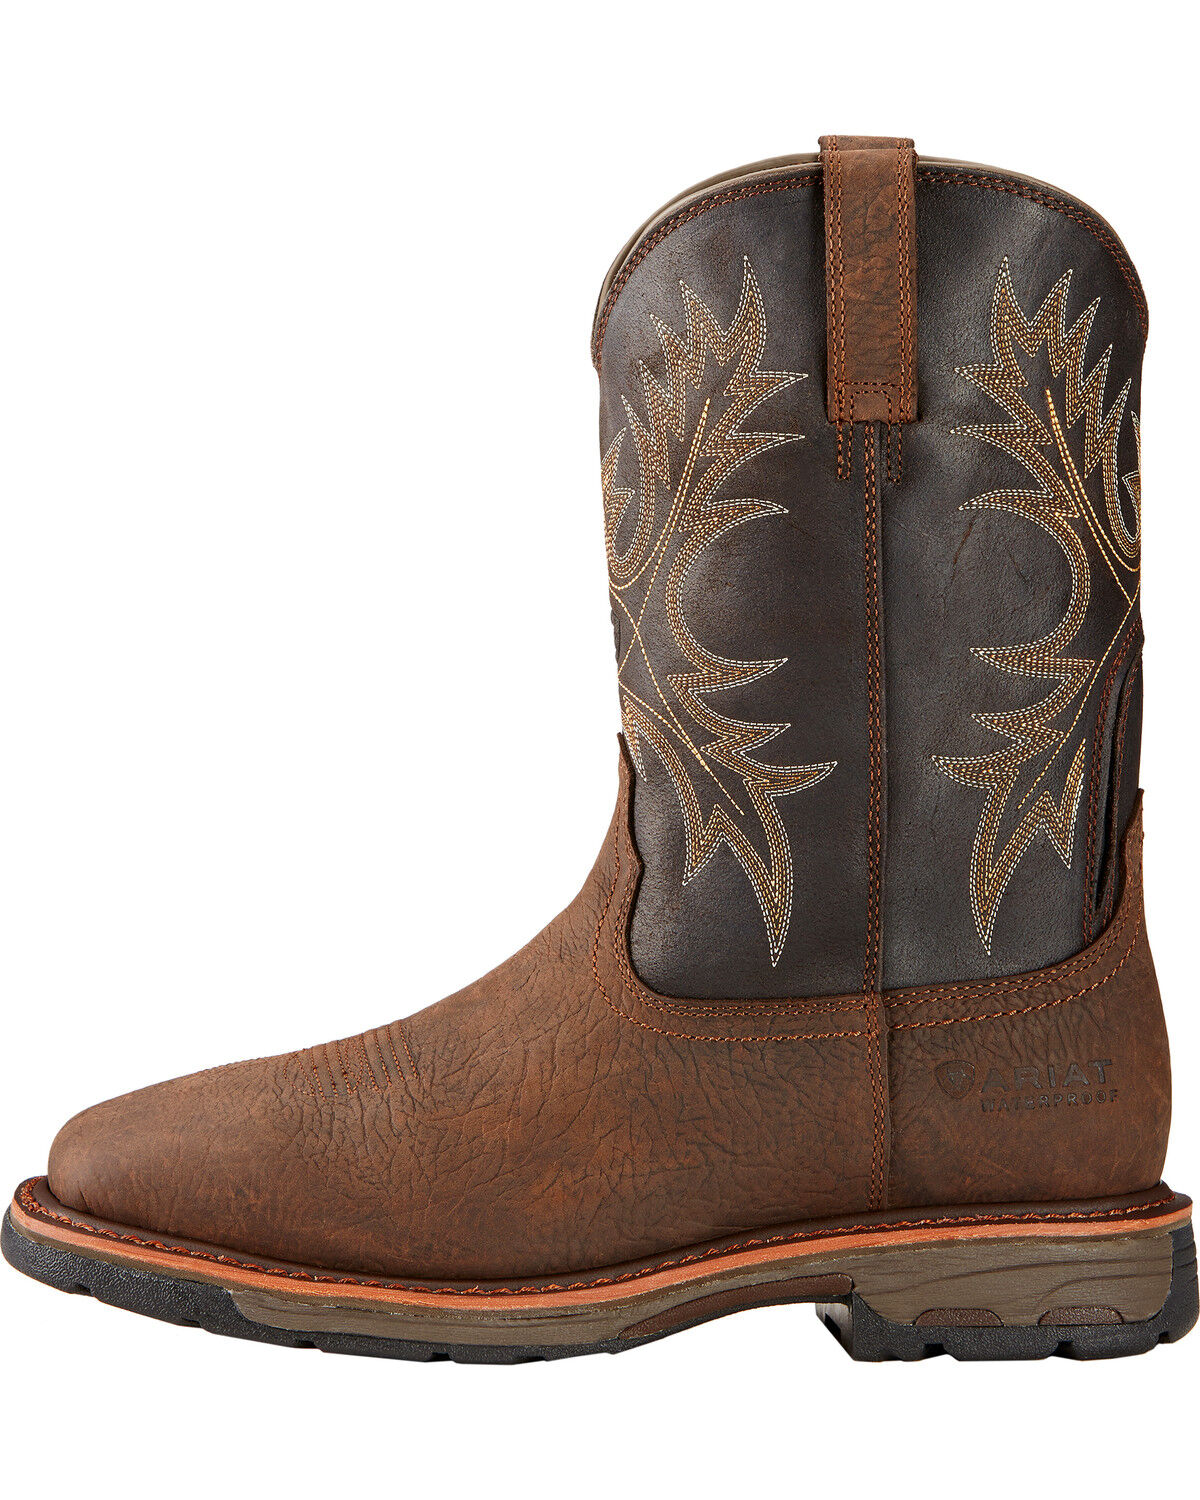 ariat work boots square toe